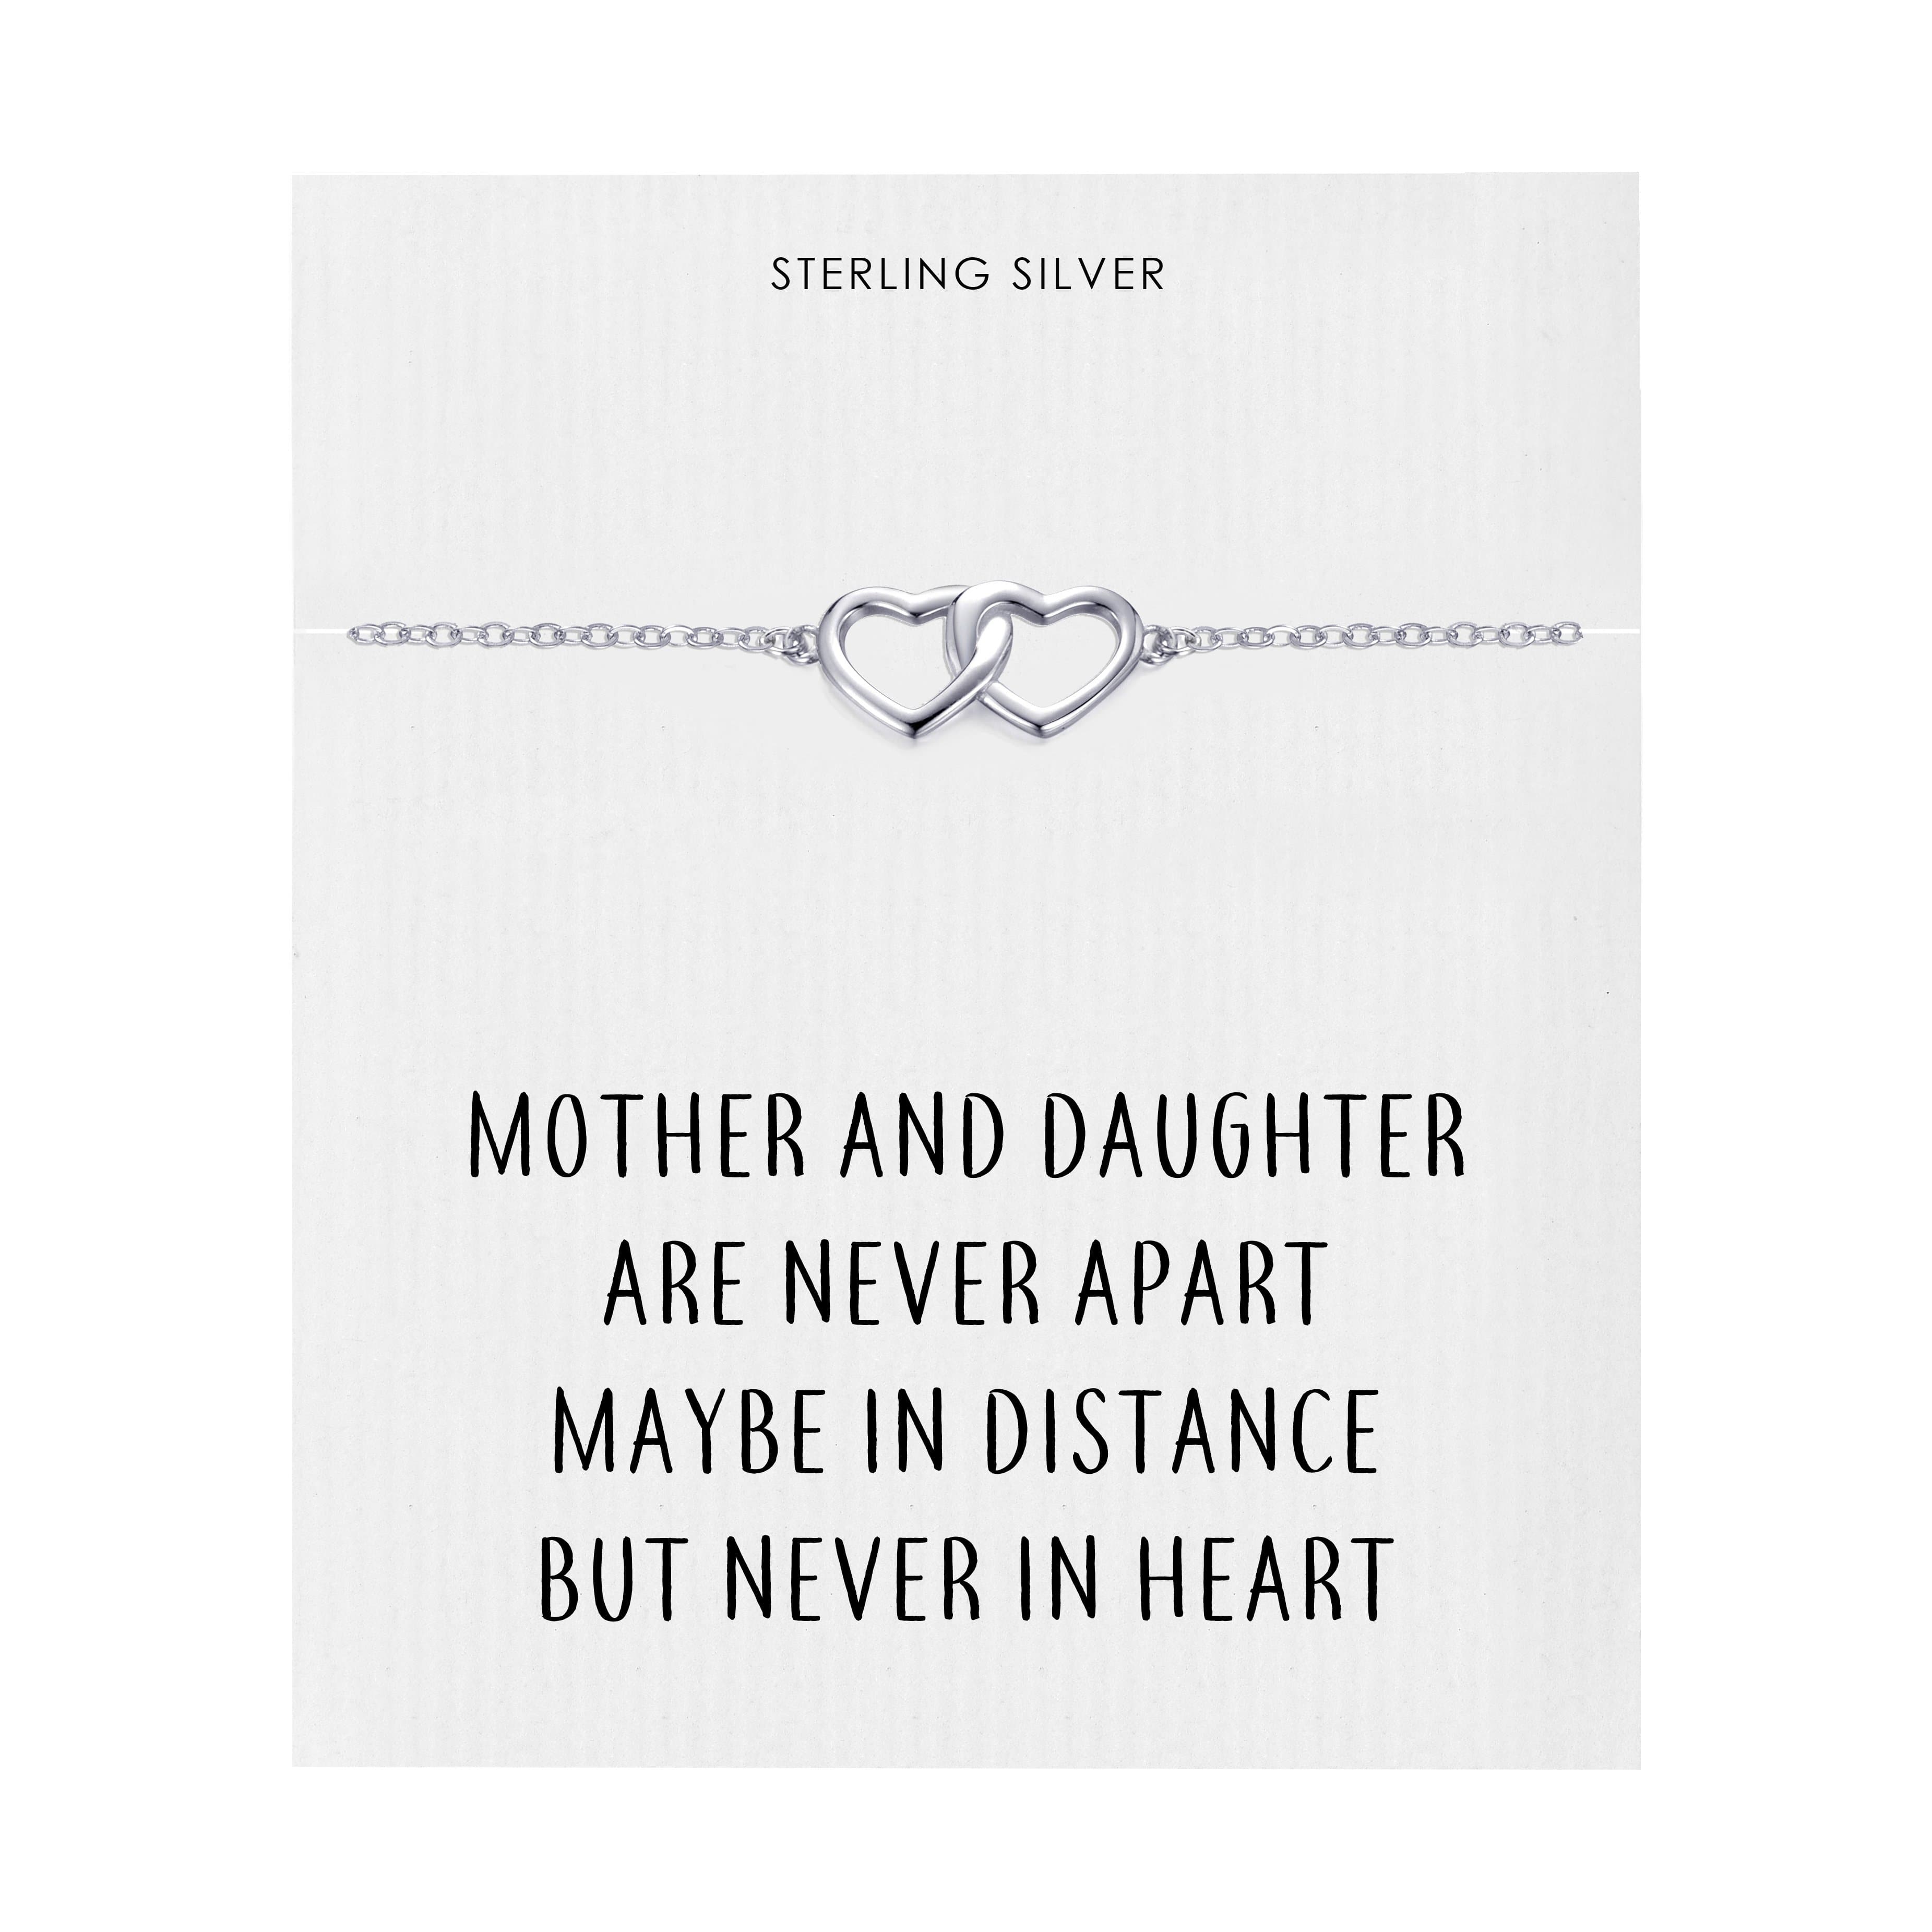 Sterling Silver Mother and Daughter Quote Heart Link Bracelet by Philip Jones Jewellery